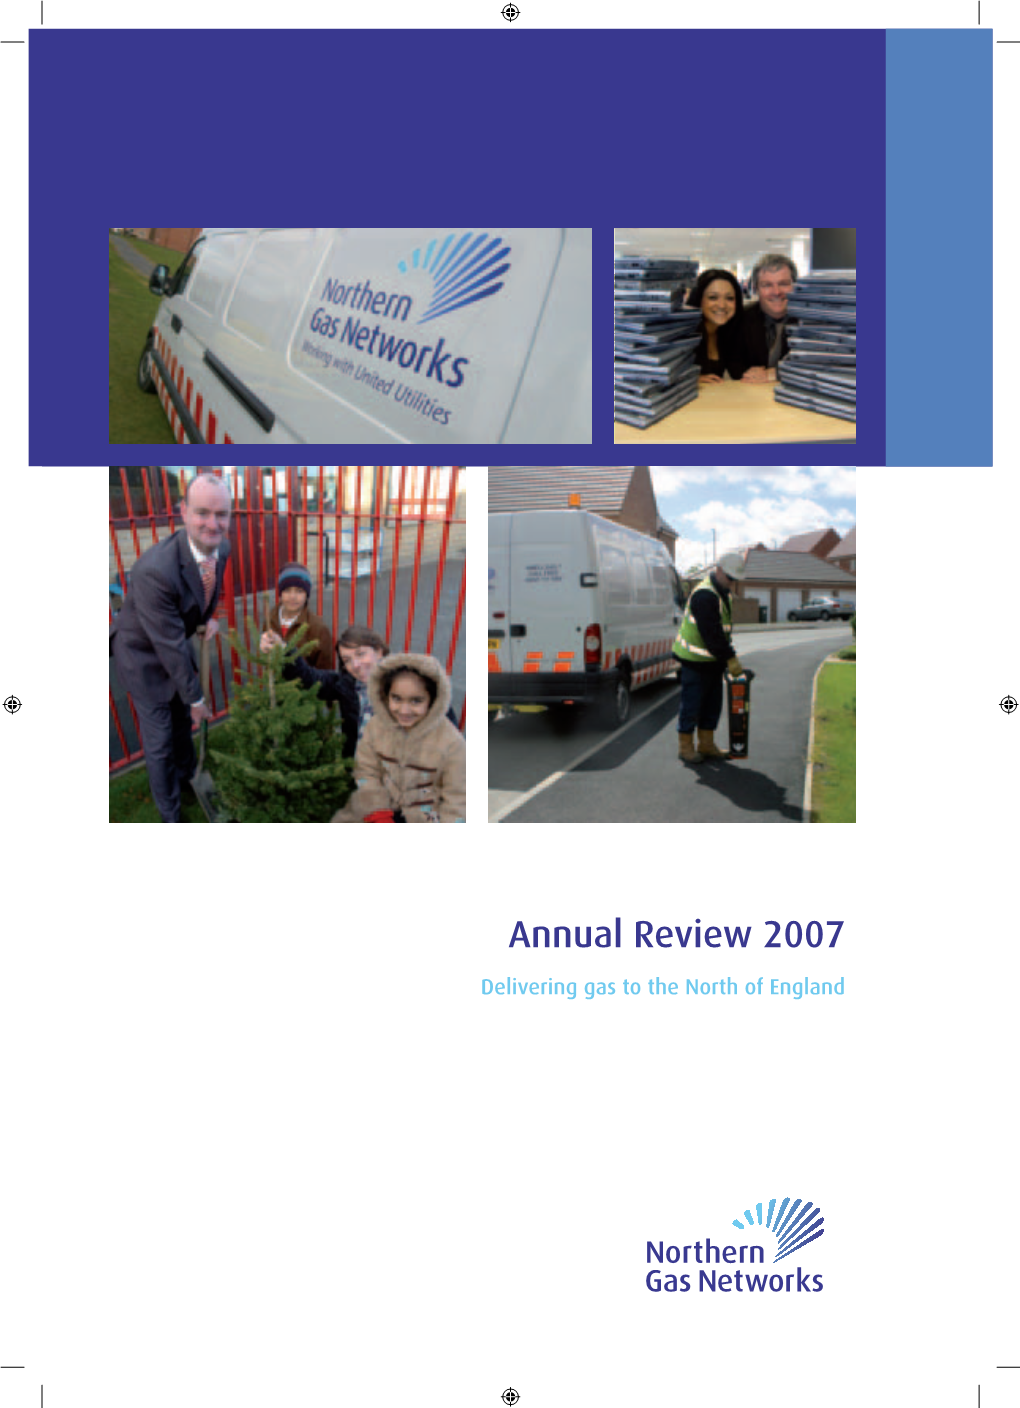 Annual Review 2007 Delivering Gas to the North of England Northern Gas Networks